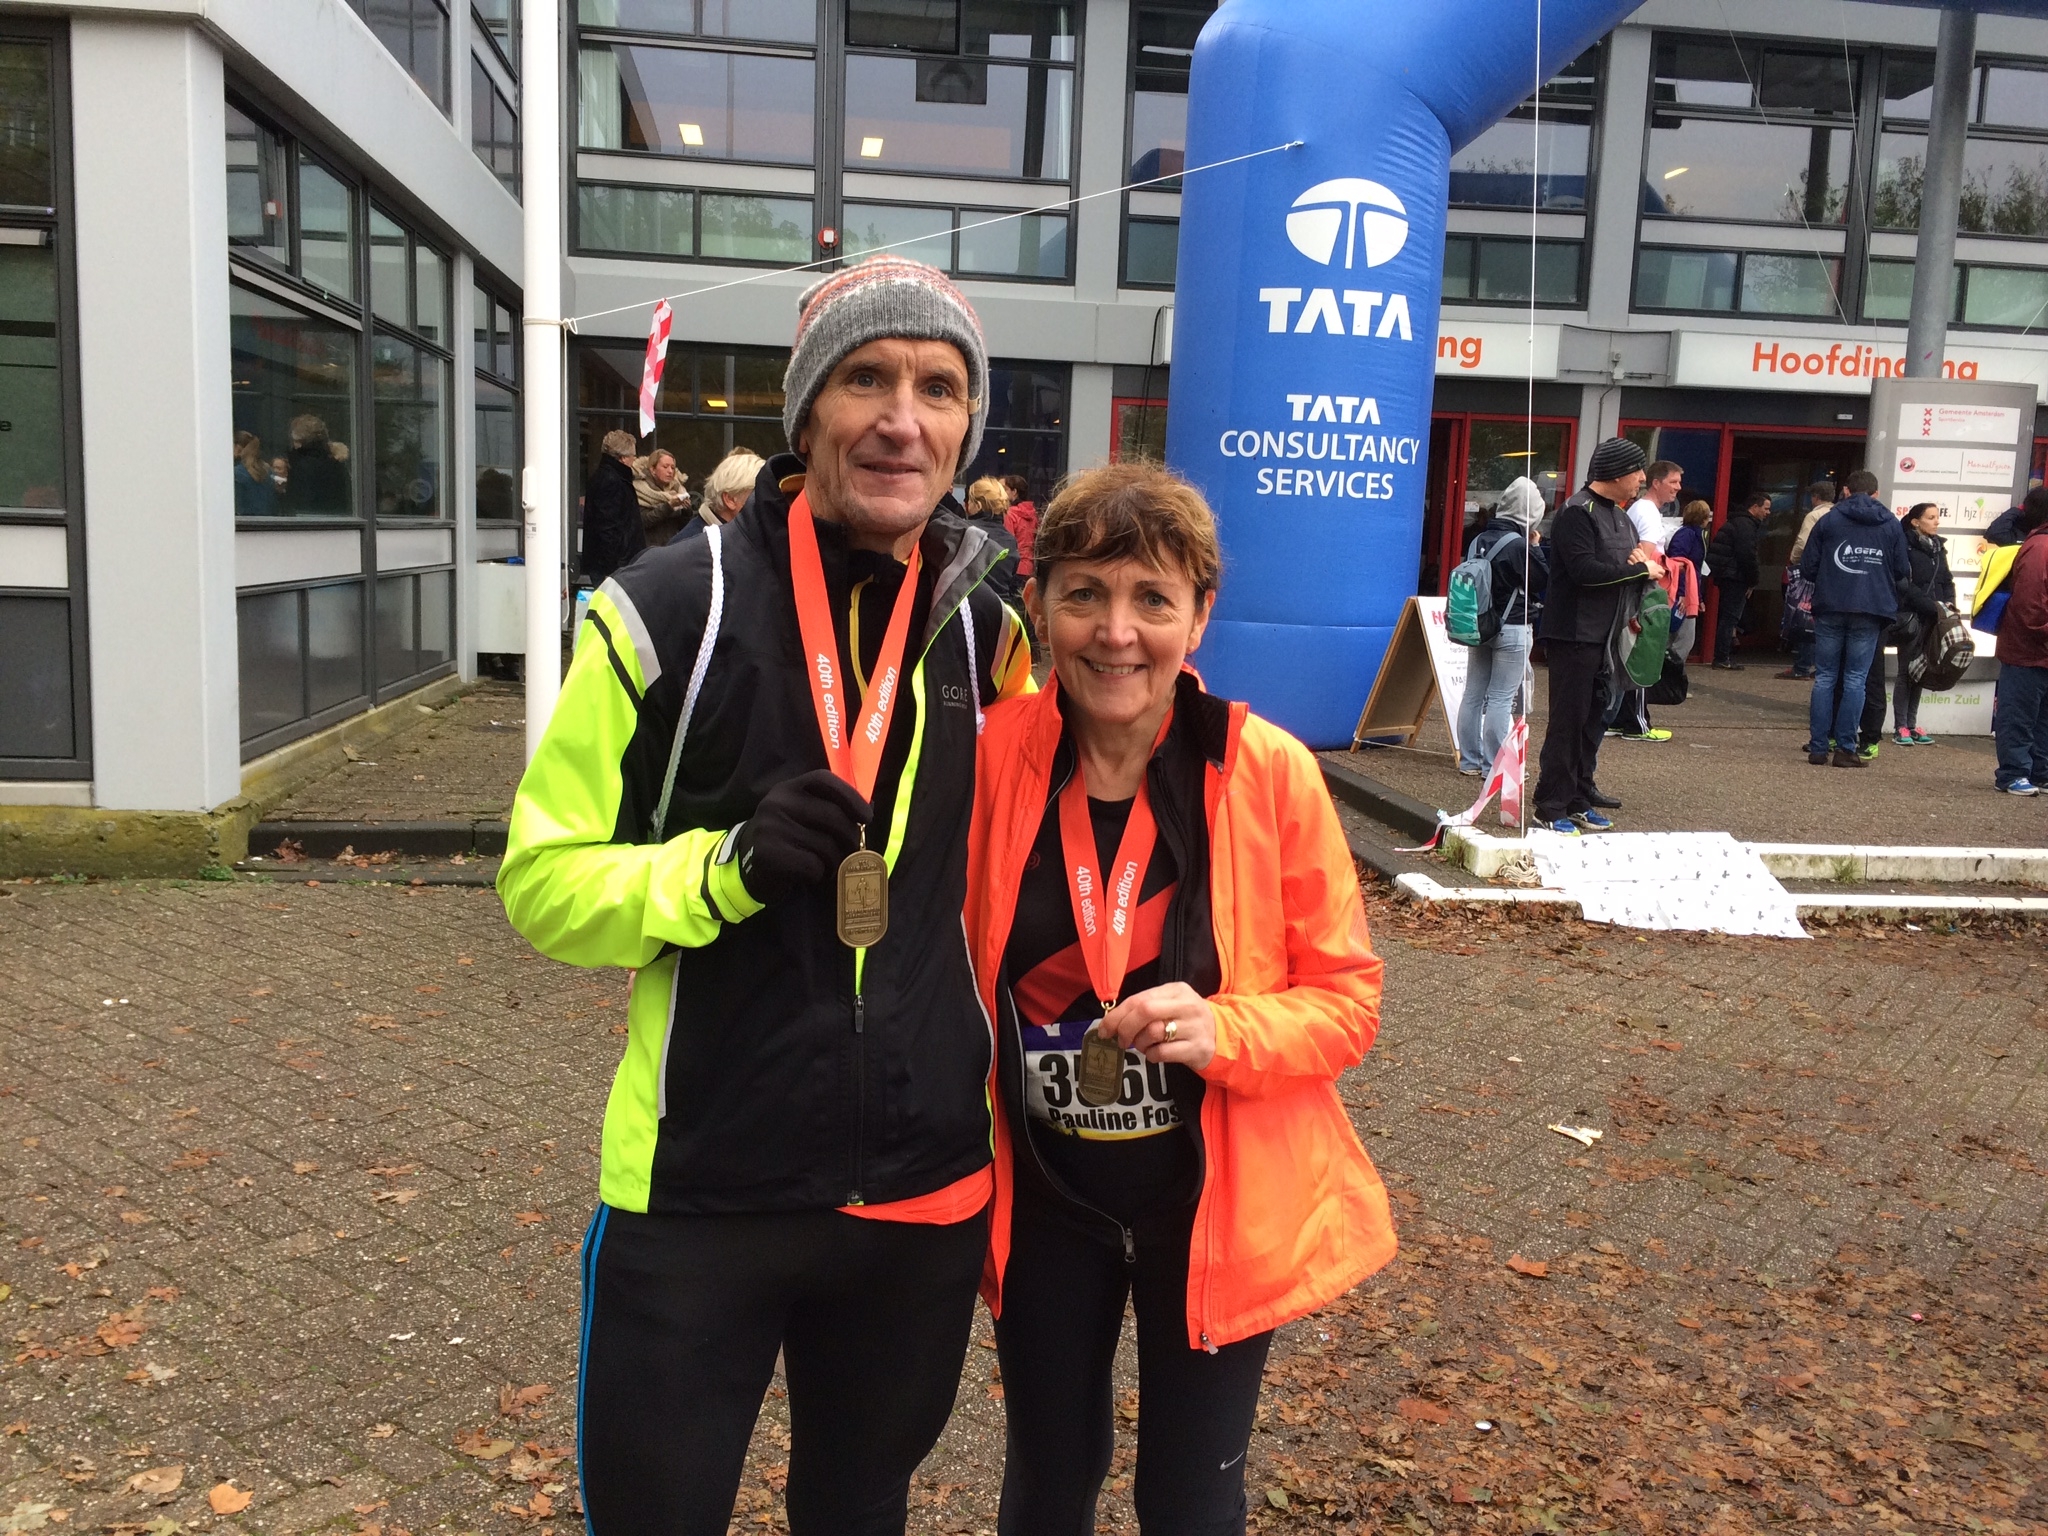 Tony and Pauline Foster from Wigan ran the Amsterdam marathon on Sunday 18th October 2015. Pauline ran the half marathon while Tony ran the whole 26 miles. It's the first time either of them have ever ran a marathon before.